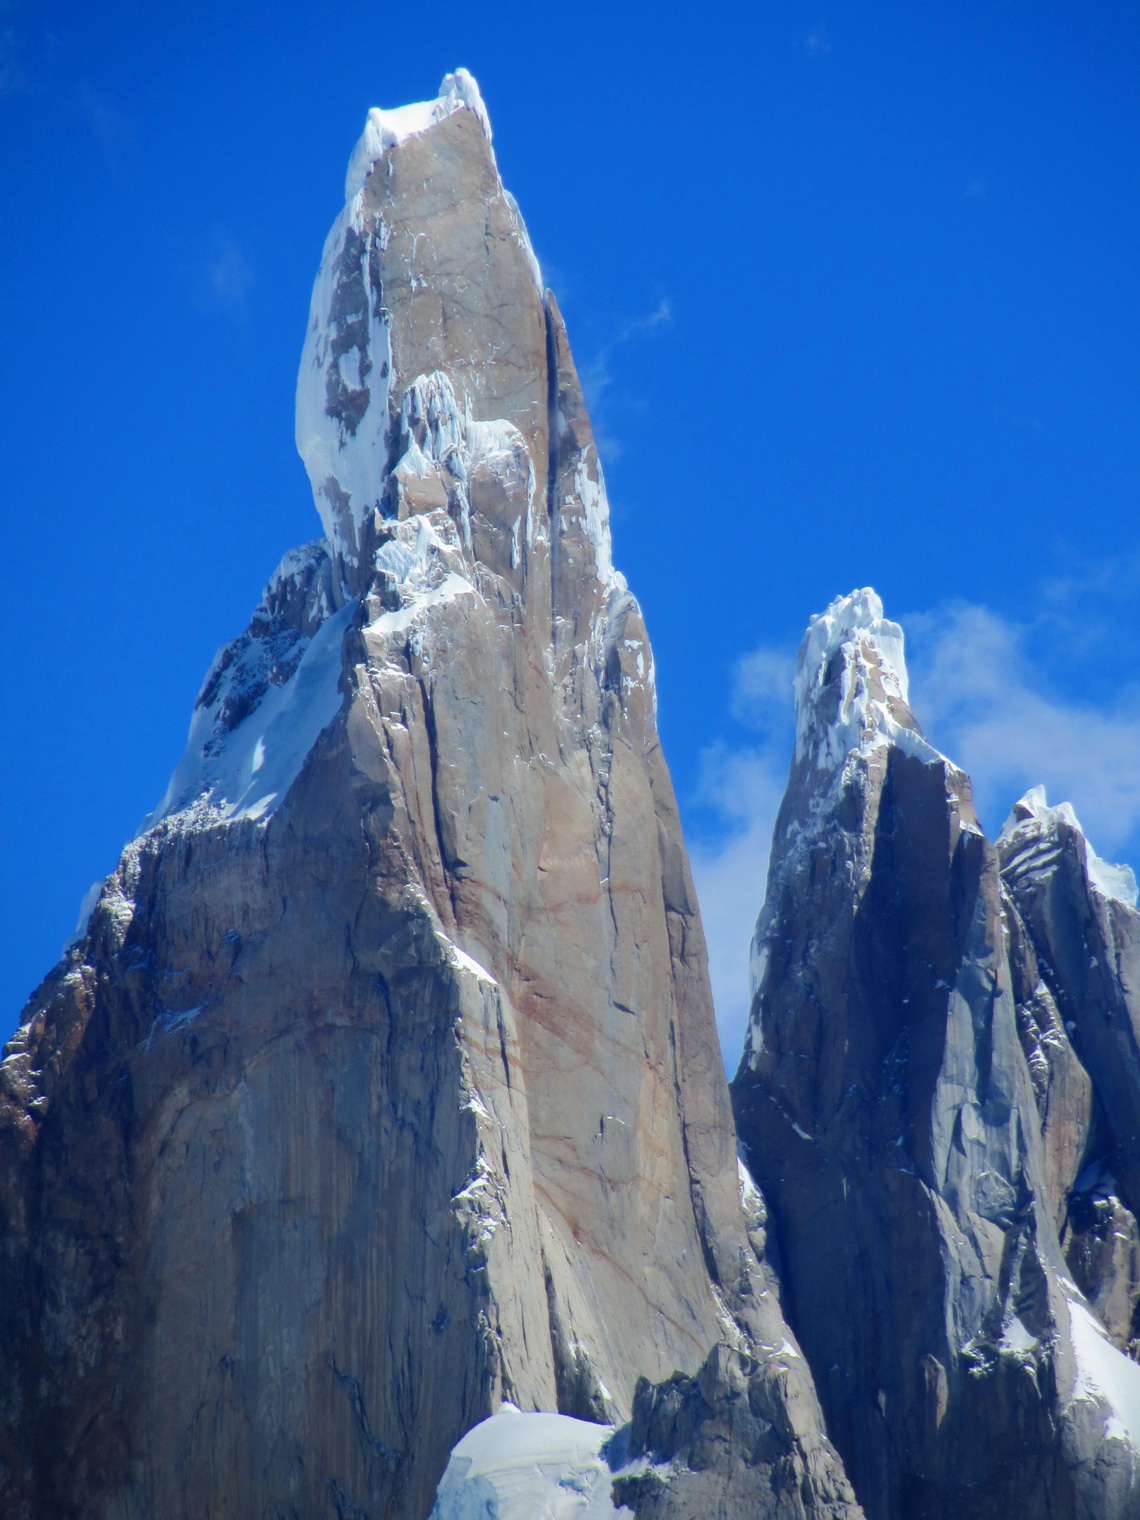 Majestic Cerro Torre, one of the most difficult and dangerous mountains on earth